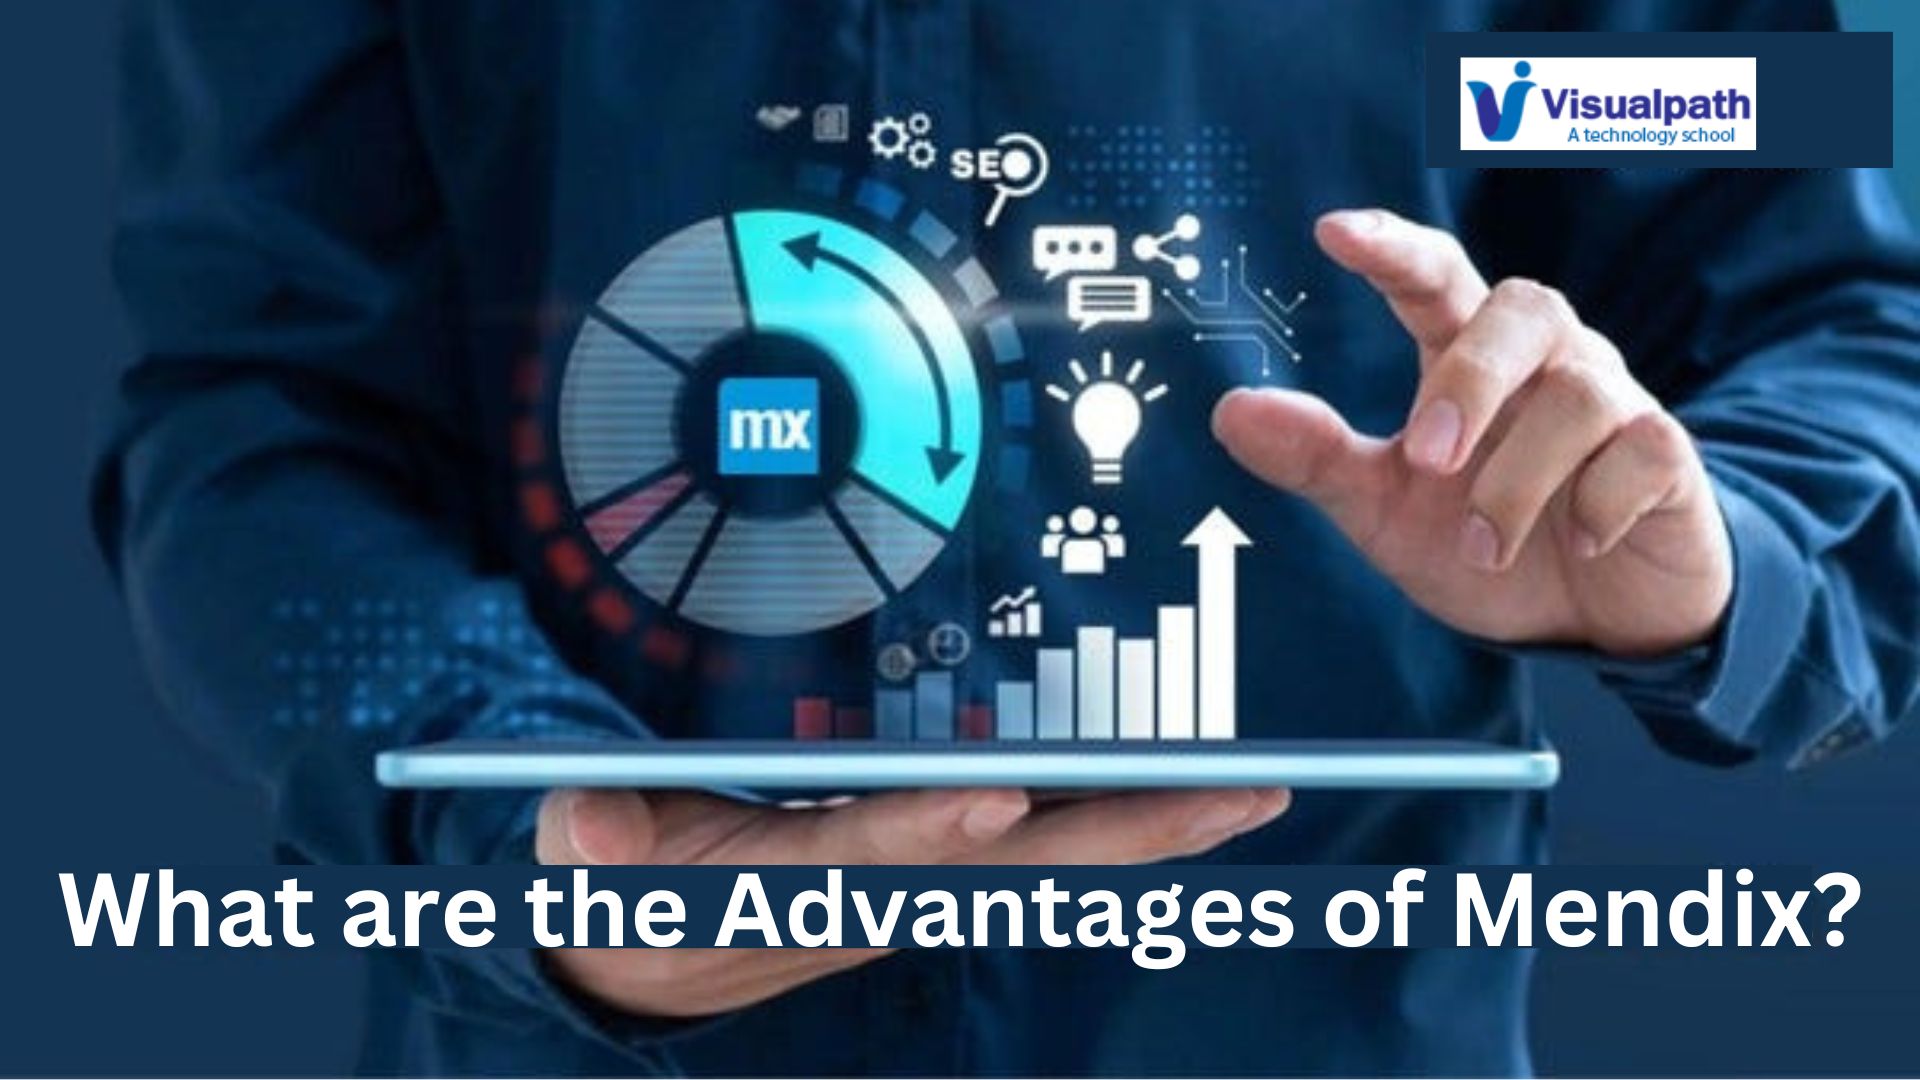 What are the Advantages of Mendix?